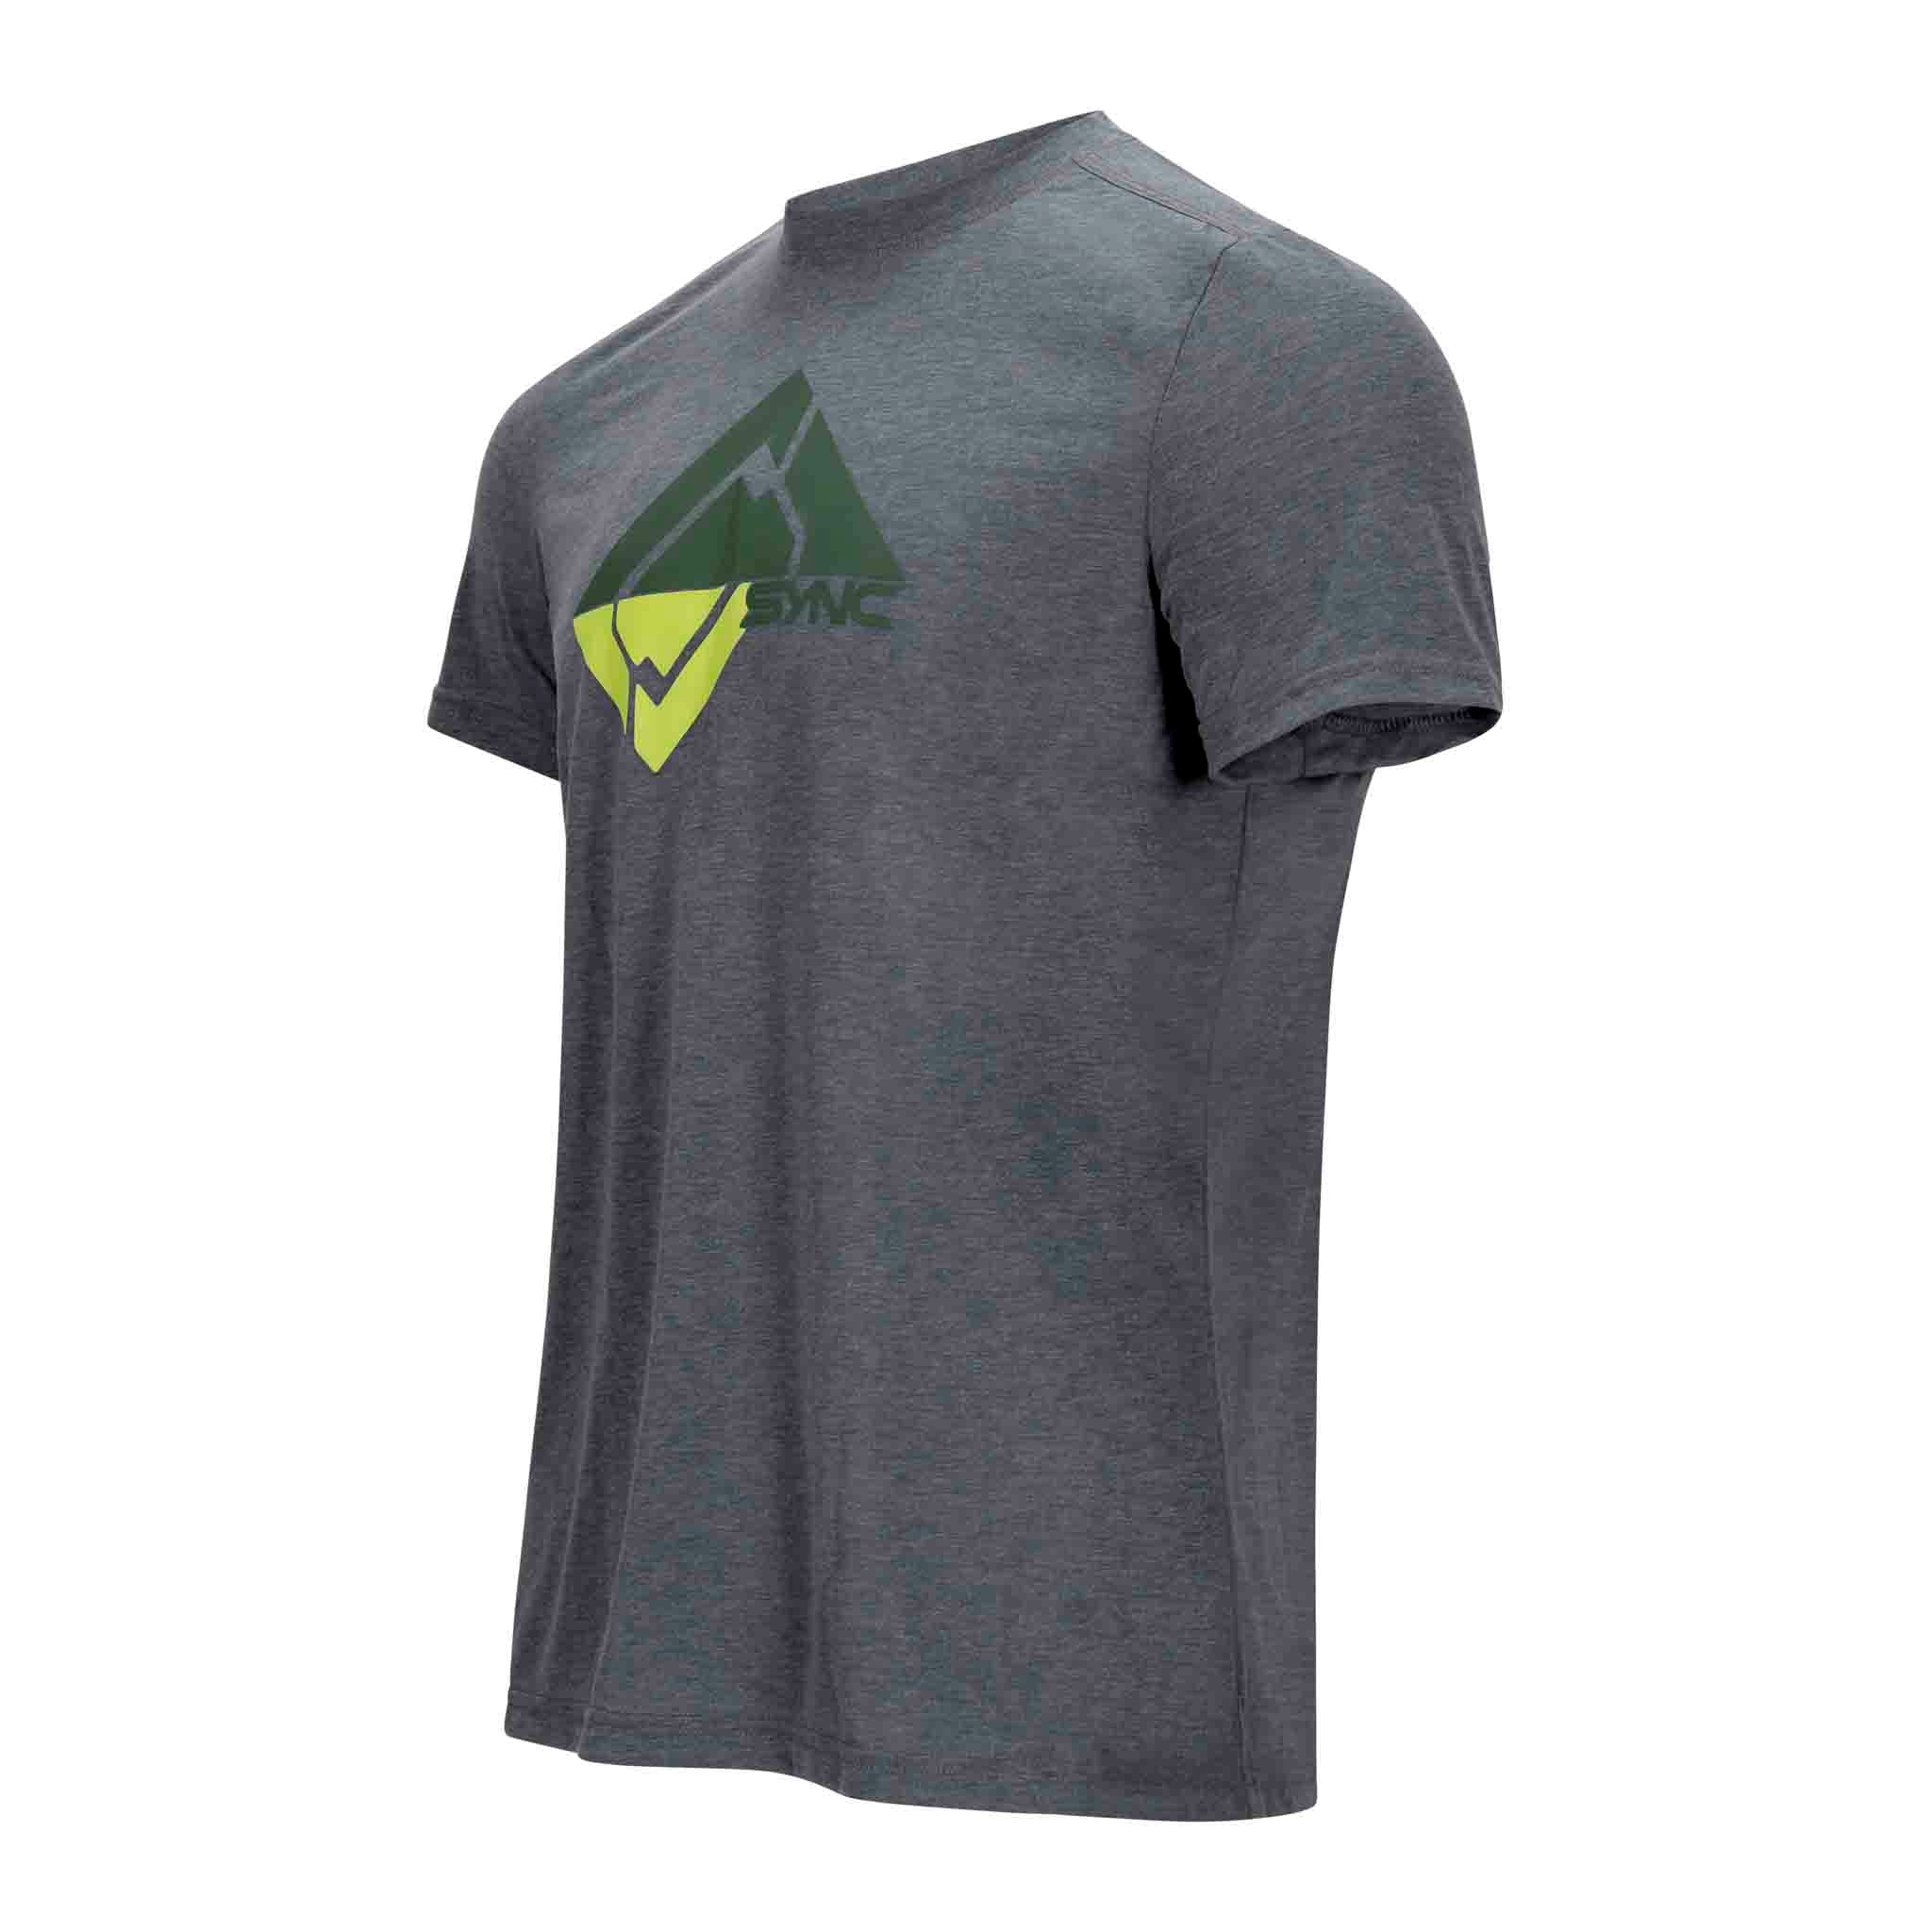 Glacier Performance Men's Shirt, 2-pack WRINKLE Free 4-Way Stretch Everday  Tee